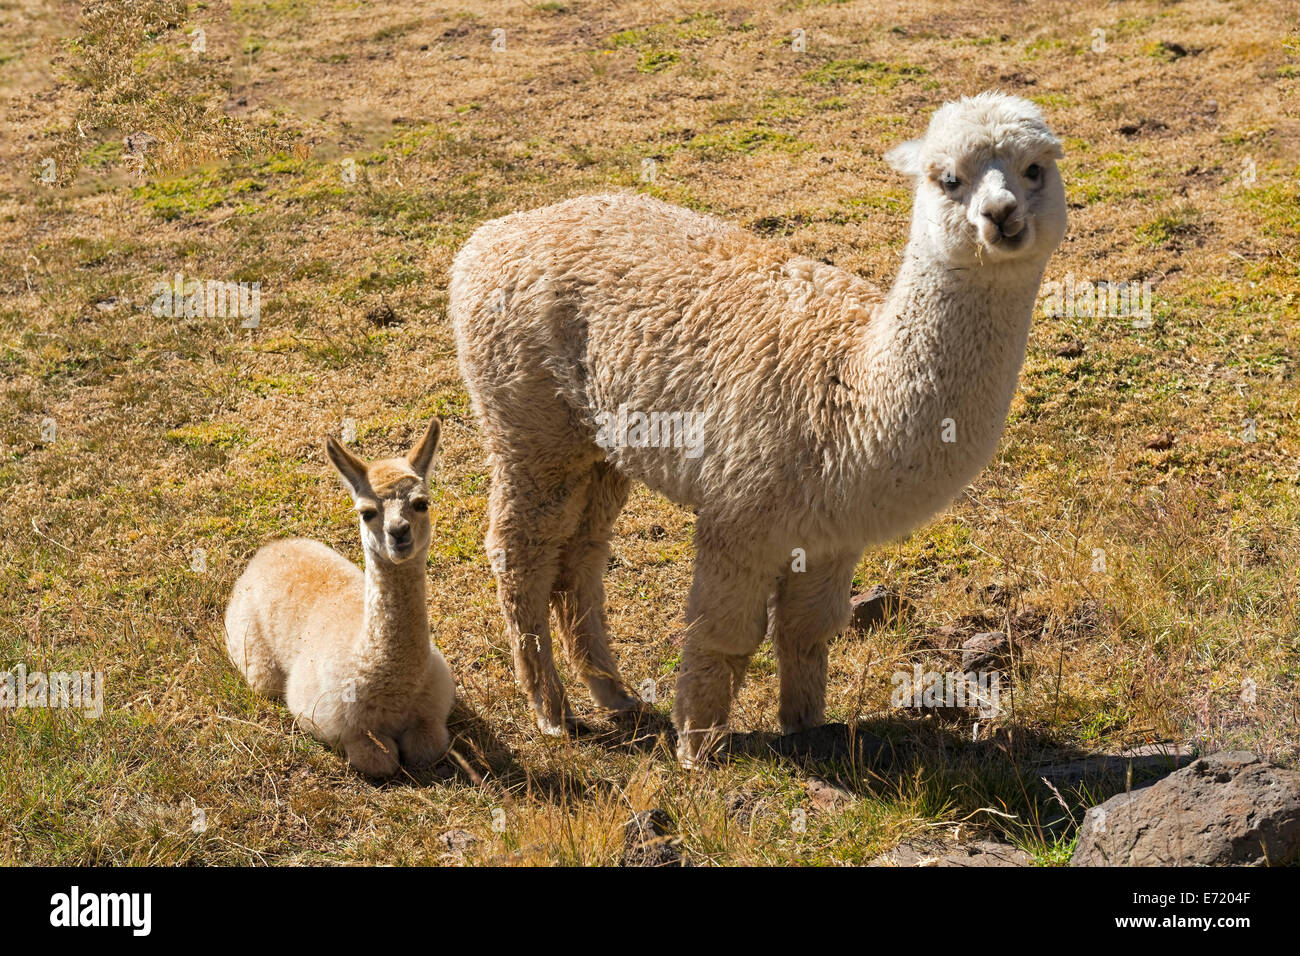 Alpaca (Vicugna pacos) adult with young, Peru Stock Photo